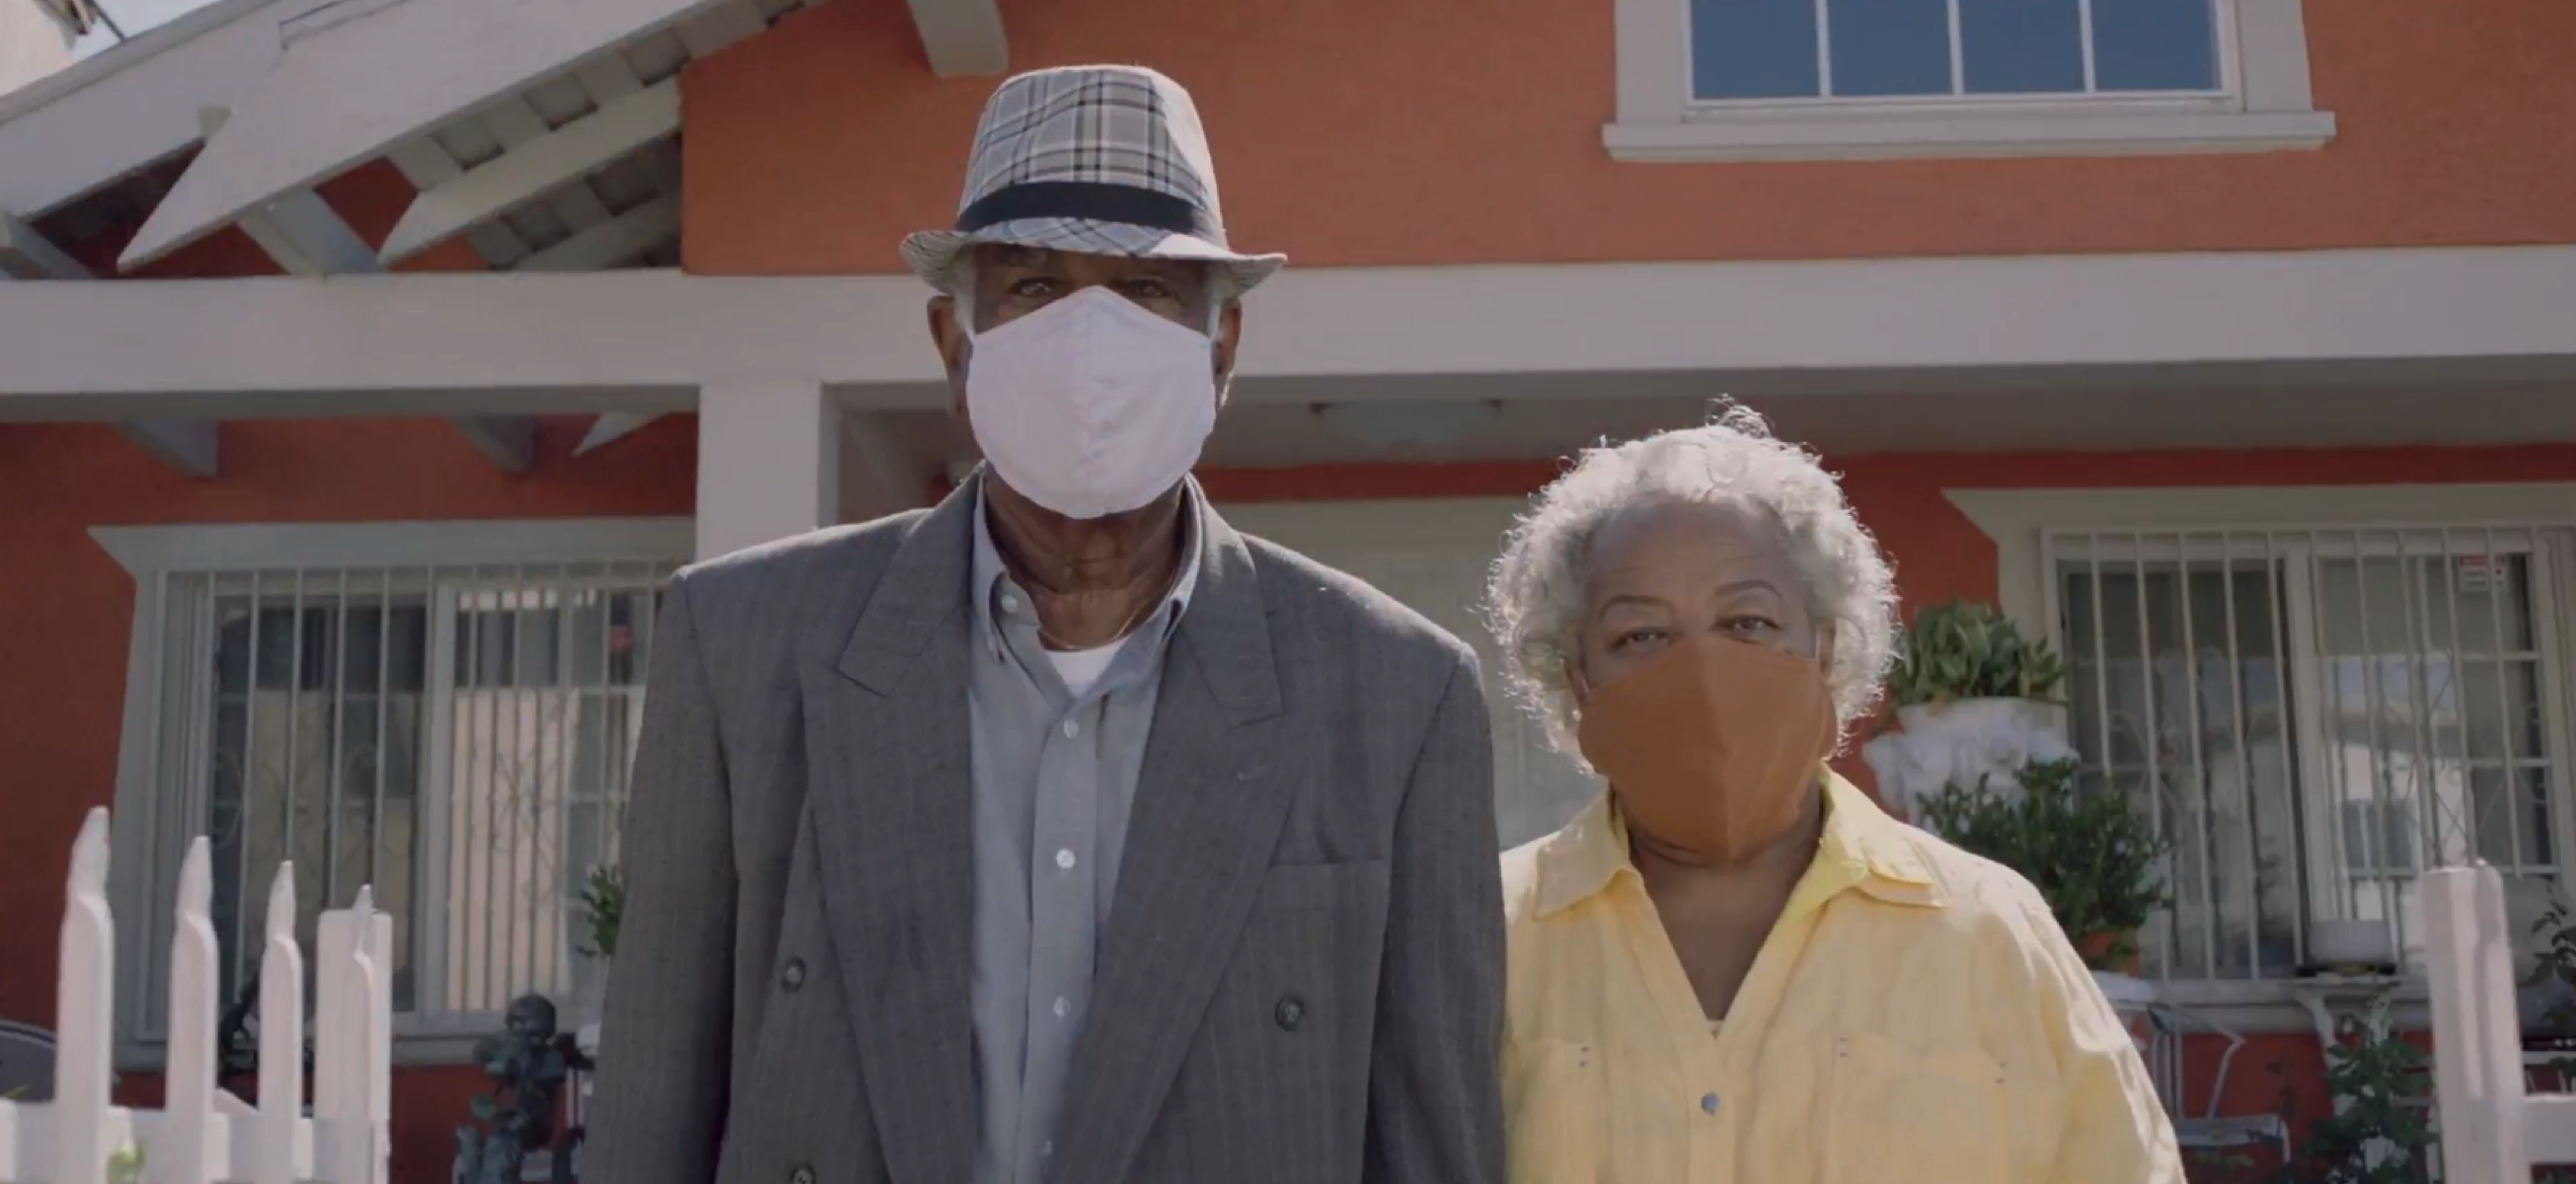 Old couple wearing masks standing in front of house